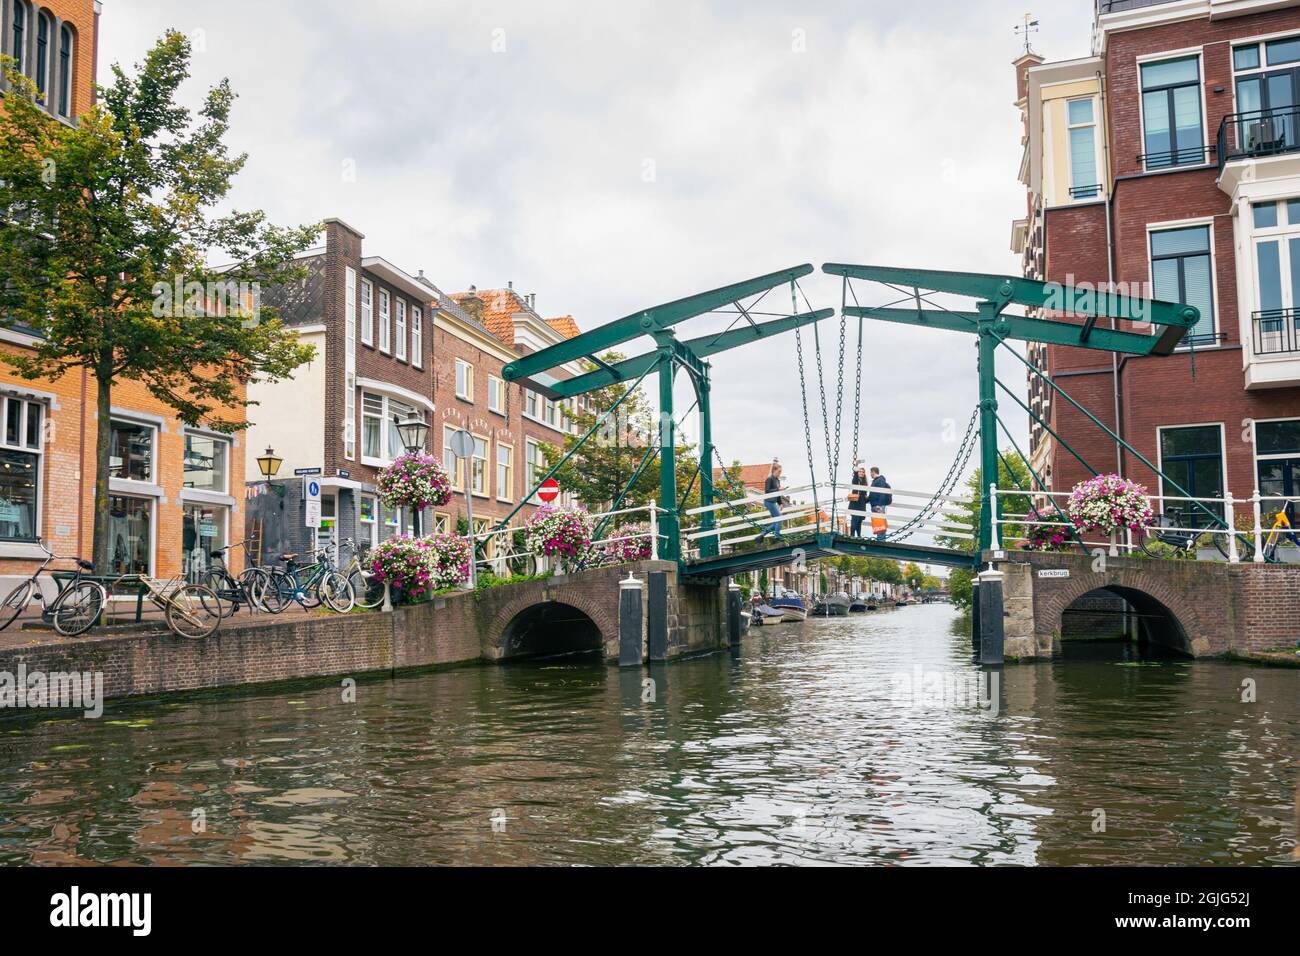 Classic Dutch city scene with drawbridge and houses along a canal. Stock Photo